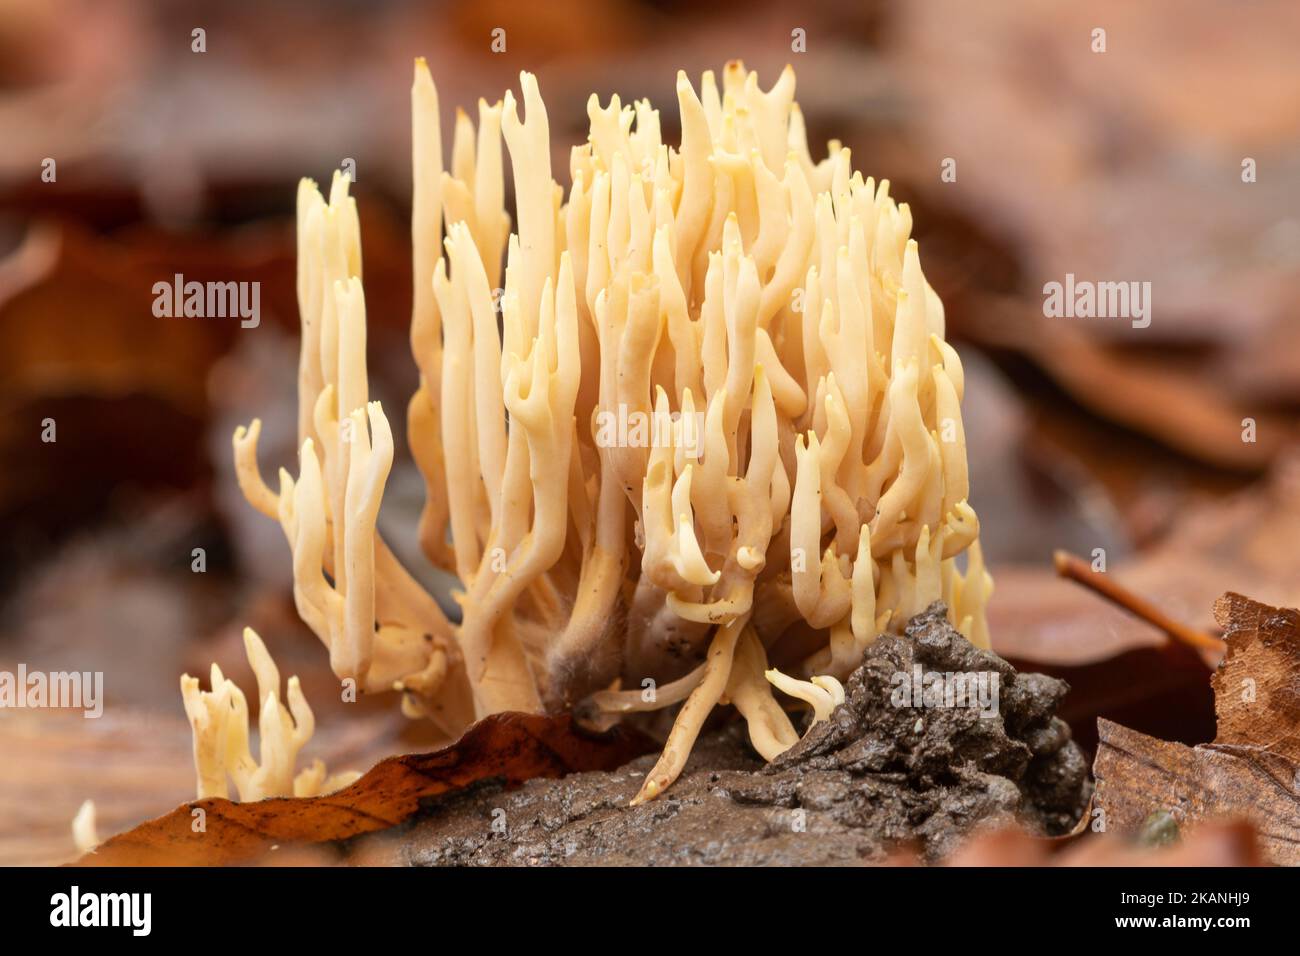 Ramaria stricta, upright coral fungus, growing in beech woods in Surrey, England, UK, during autumn Stock Photo